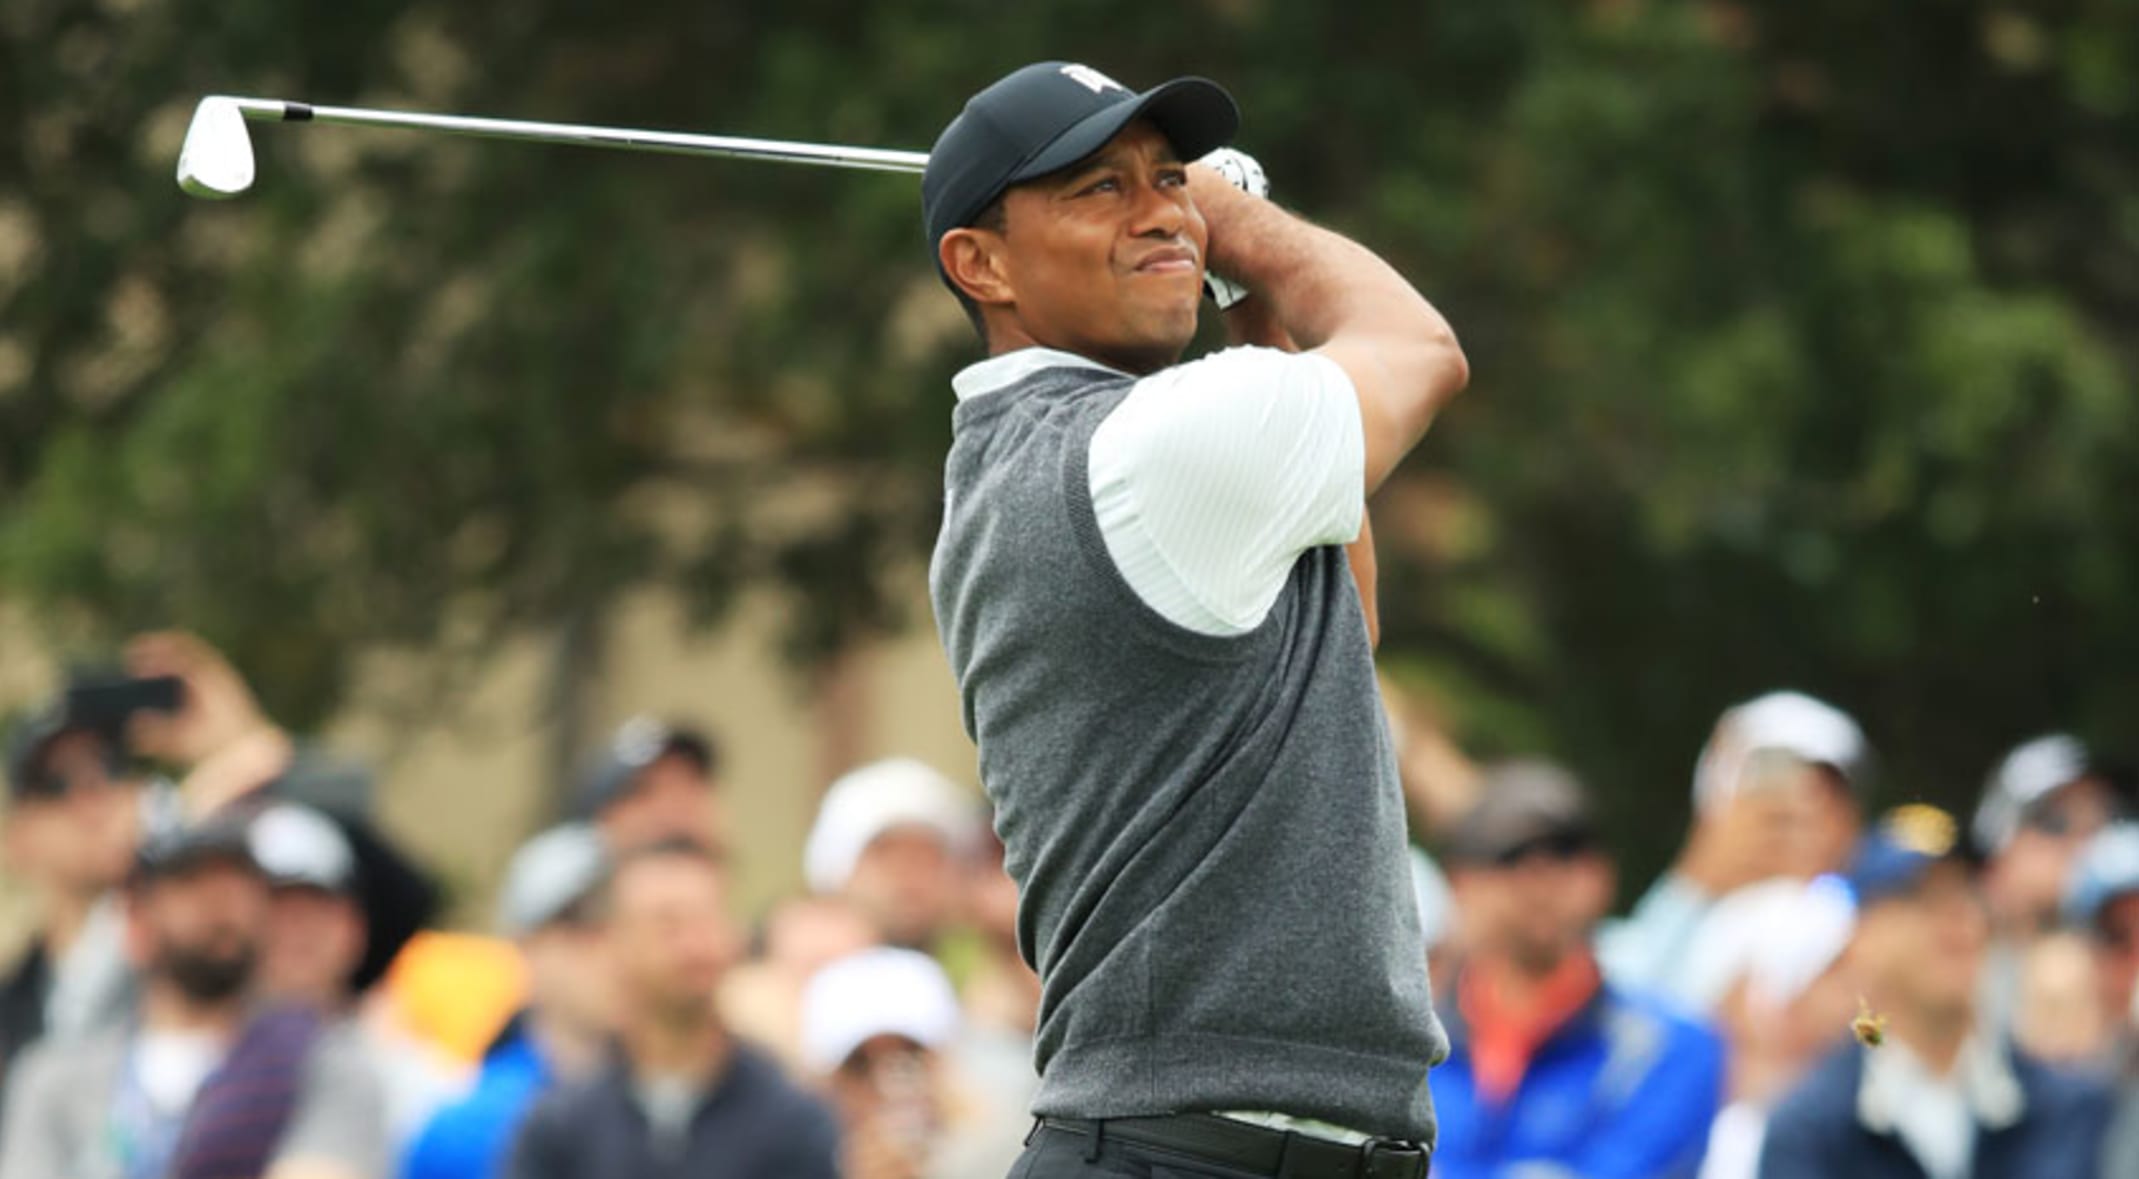 Tiger Woods Cards 1 Under 70 In Round 1 At U S Open